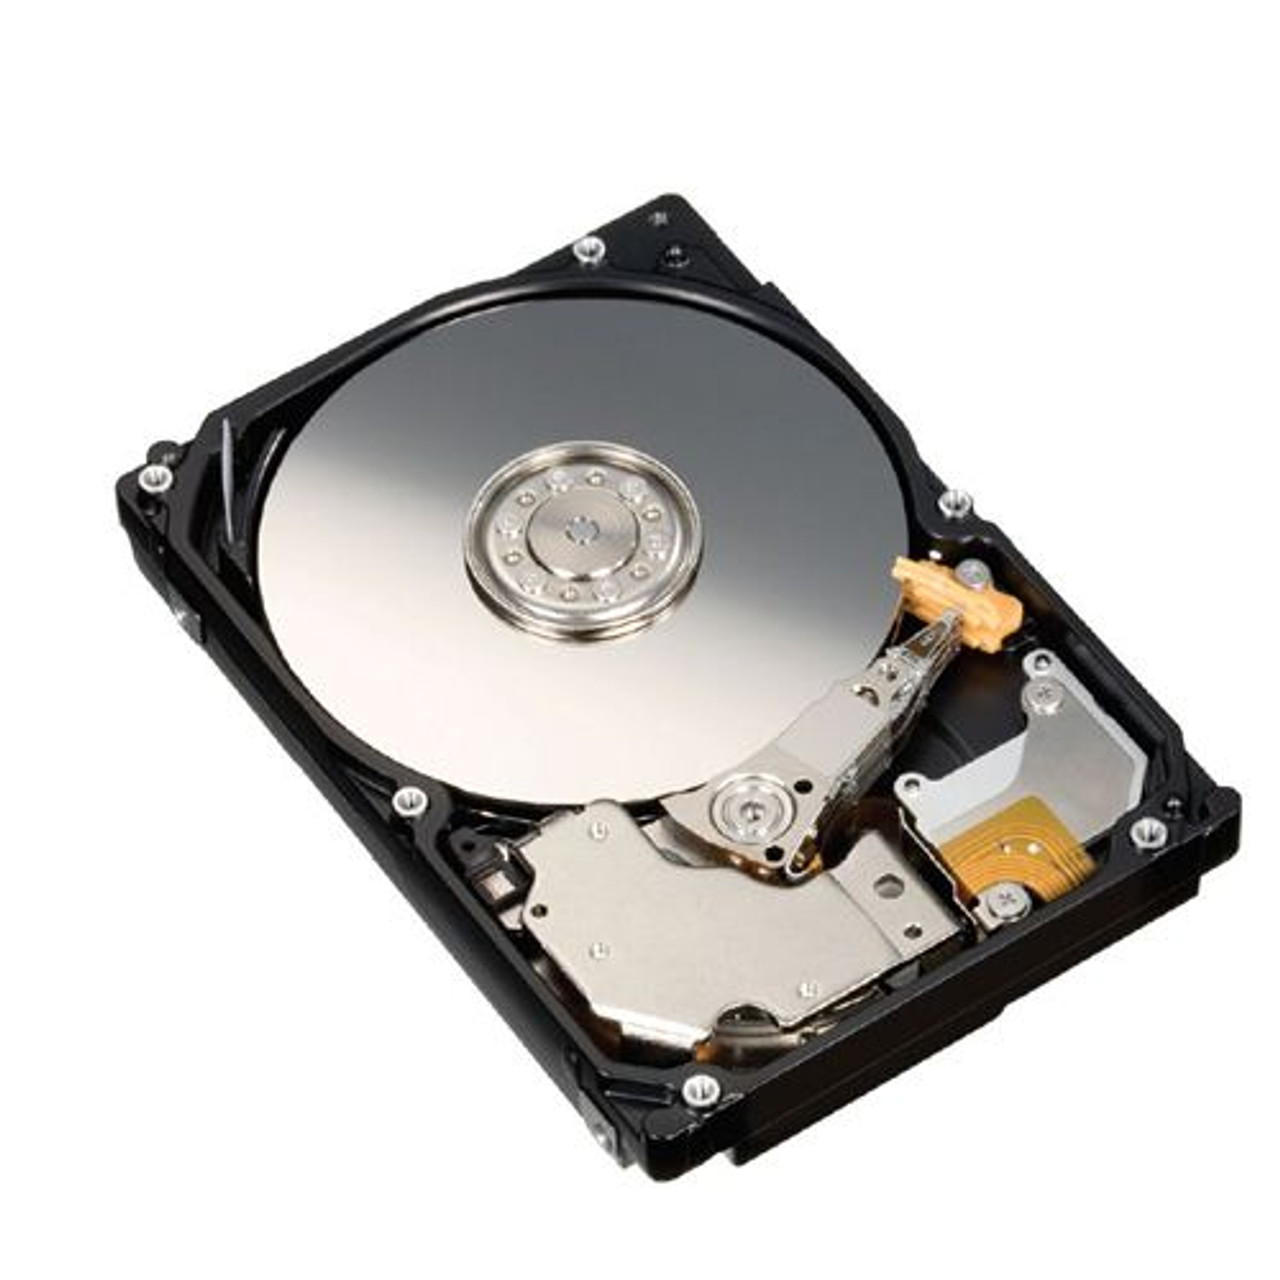 9FY246-003 - Seagate Constellation 7200 500GB 7200RPM SAS 6GB/s 16MB Cache 2.5-inch Internal Hard Disk Drive